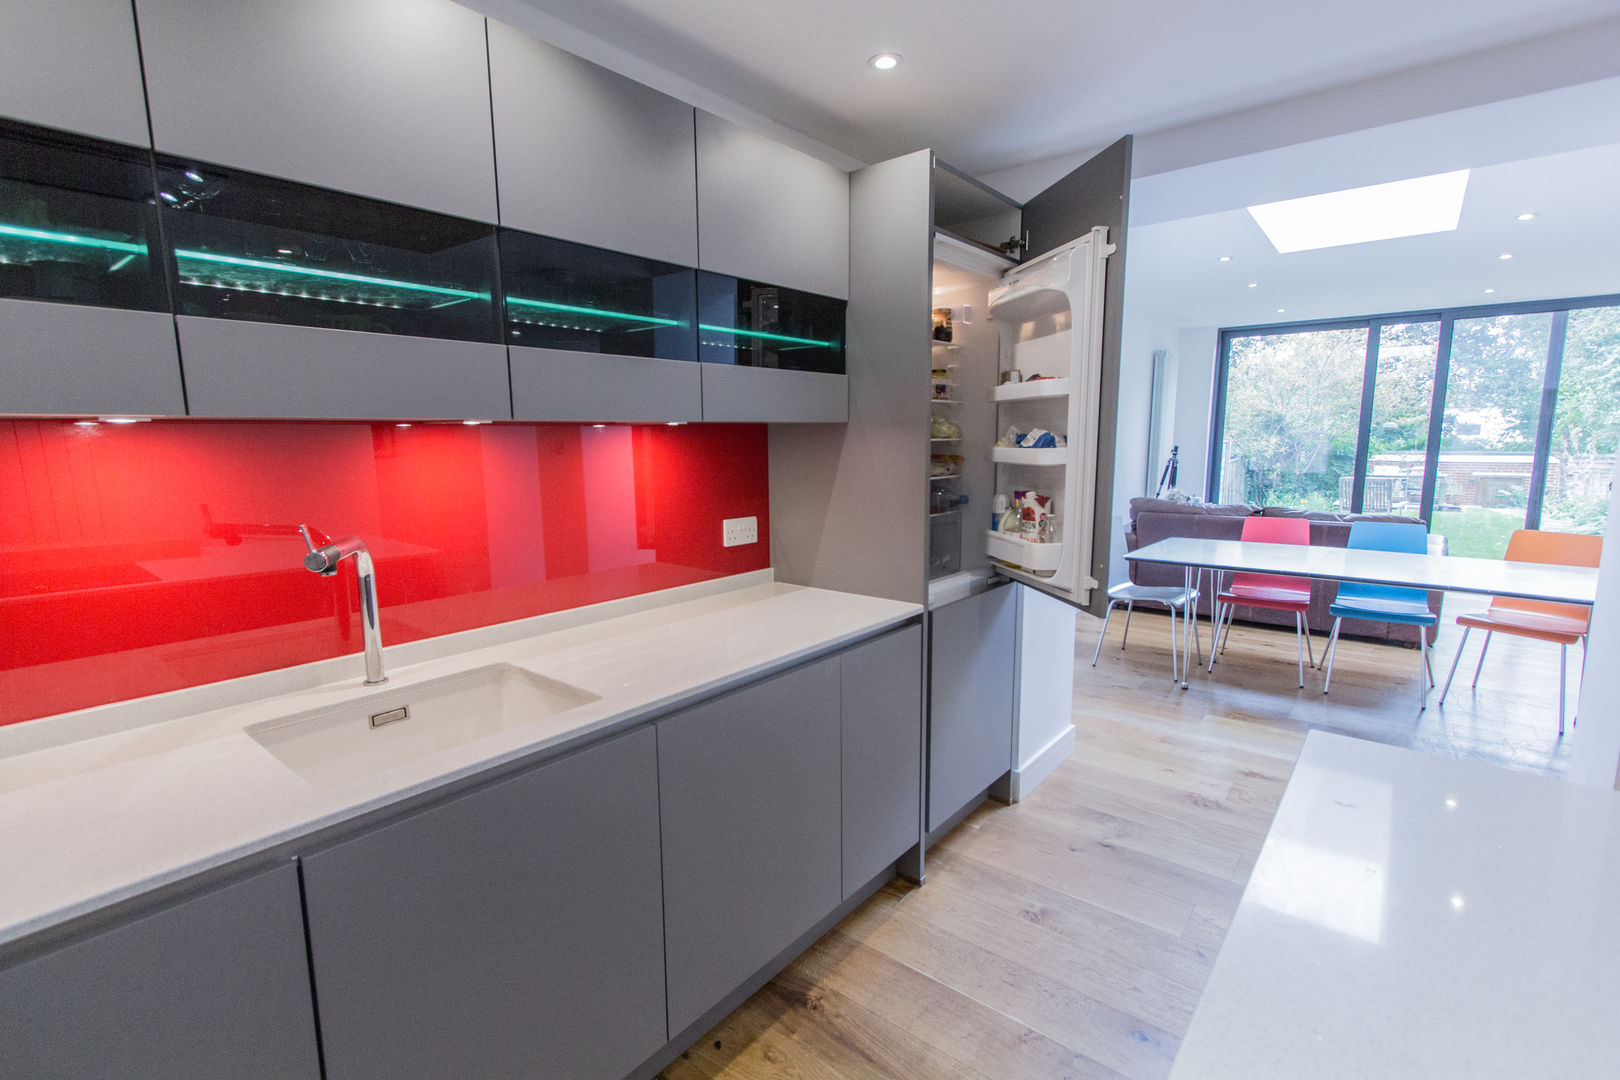 Grey & Red Eco German Kitchens مطبخ MDF Nobilia,Twinkle White worktops,Neff oven,Neff combination microwave,Blanco sink and tap,Neff Induction hob,open plan galley style kitchen,glazed wall units